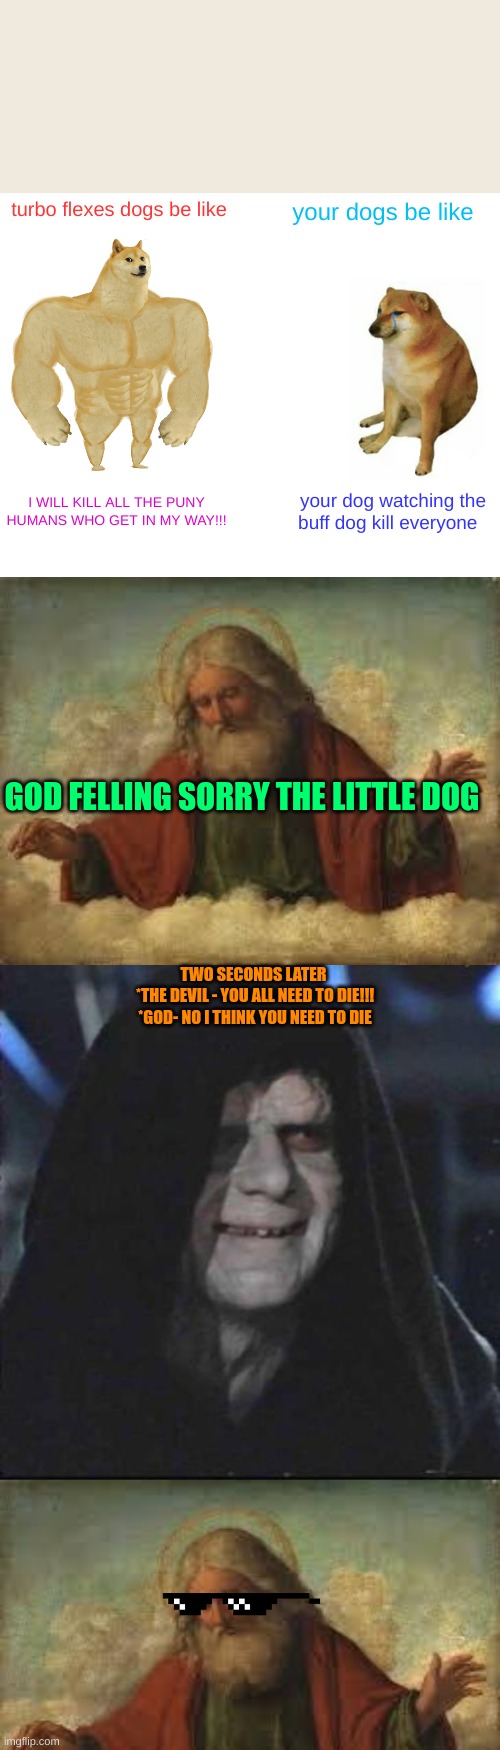 turbo flexes dogs be like; your dogs be like; I WILL KILL ALL THE PUNY HUMANS WHO GET IN MY WAY!!! your dog watching the buff dog kill everyone; GOD FELLING SORRY THE LITTLE DOG; TWO SECONDS LATER 

*THE DEVIL - YOU ALL NEED TO DIE!!!
*GOD- NO I THINK YOU NEED TO DIE | image tagged in memes,buff doge vs cheems,god,sidious error | made w/ Imgflip meme maker